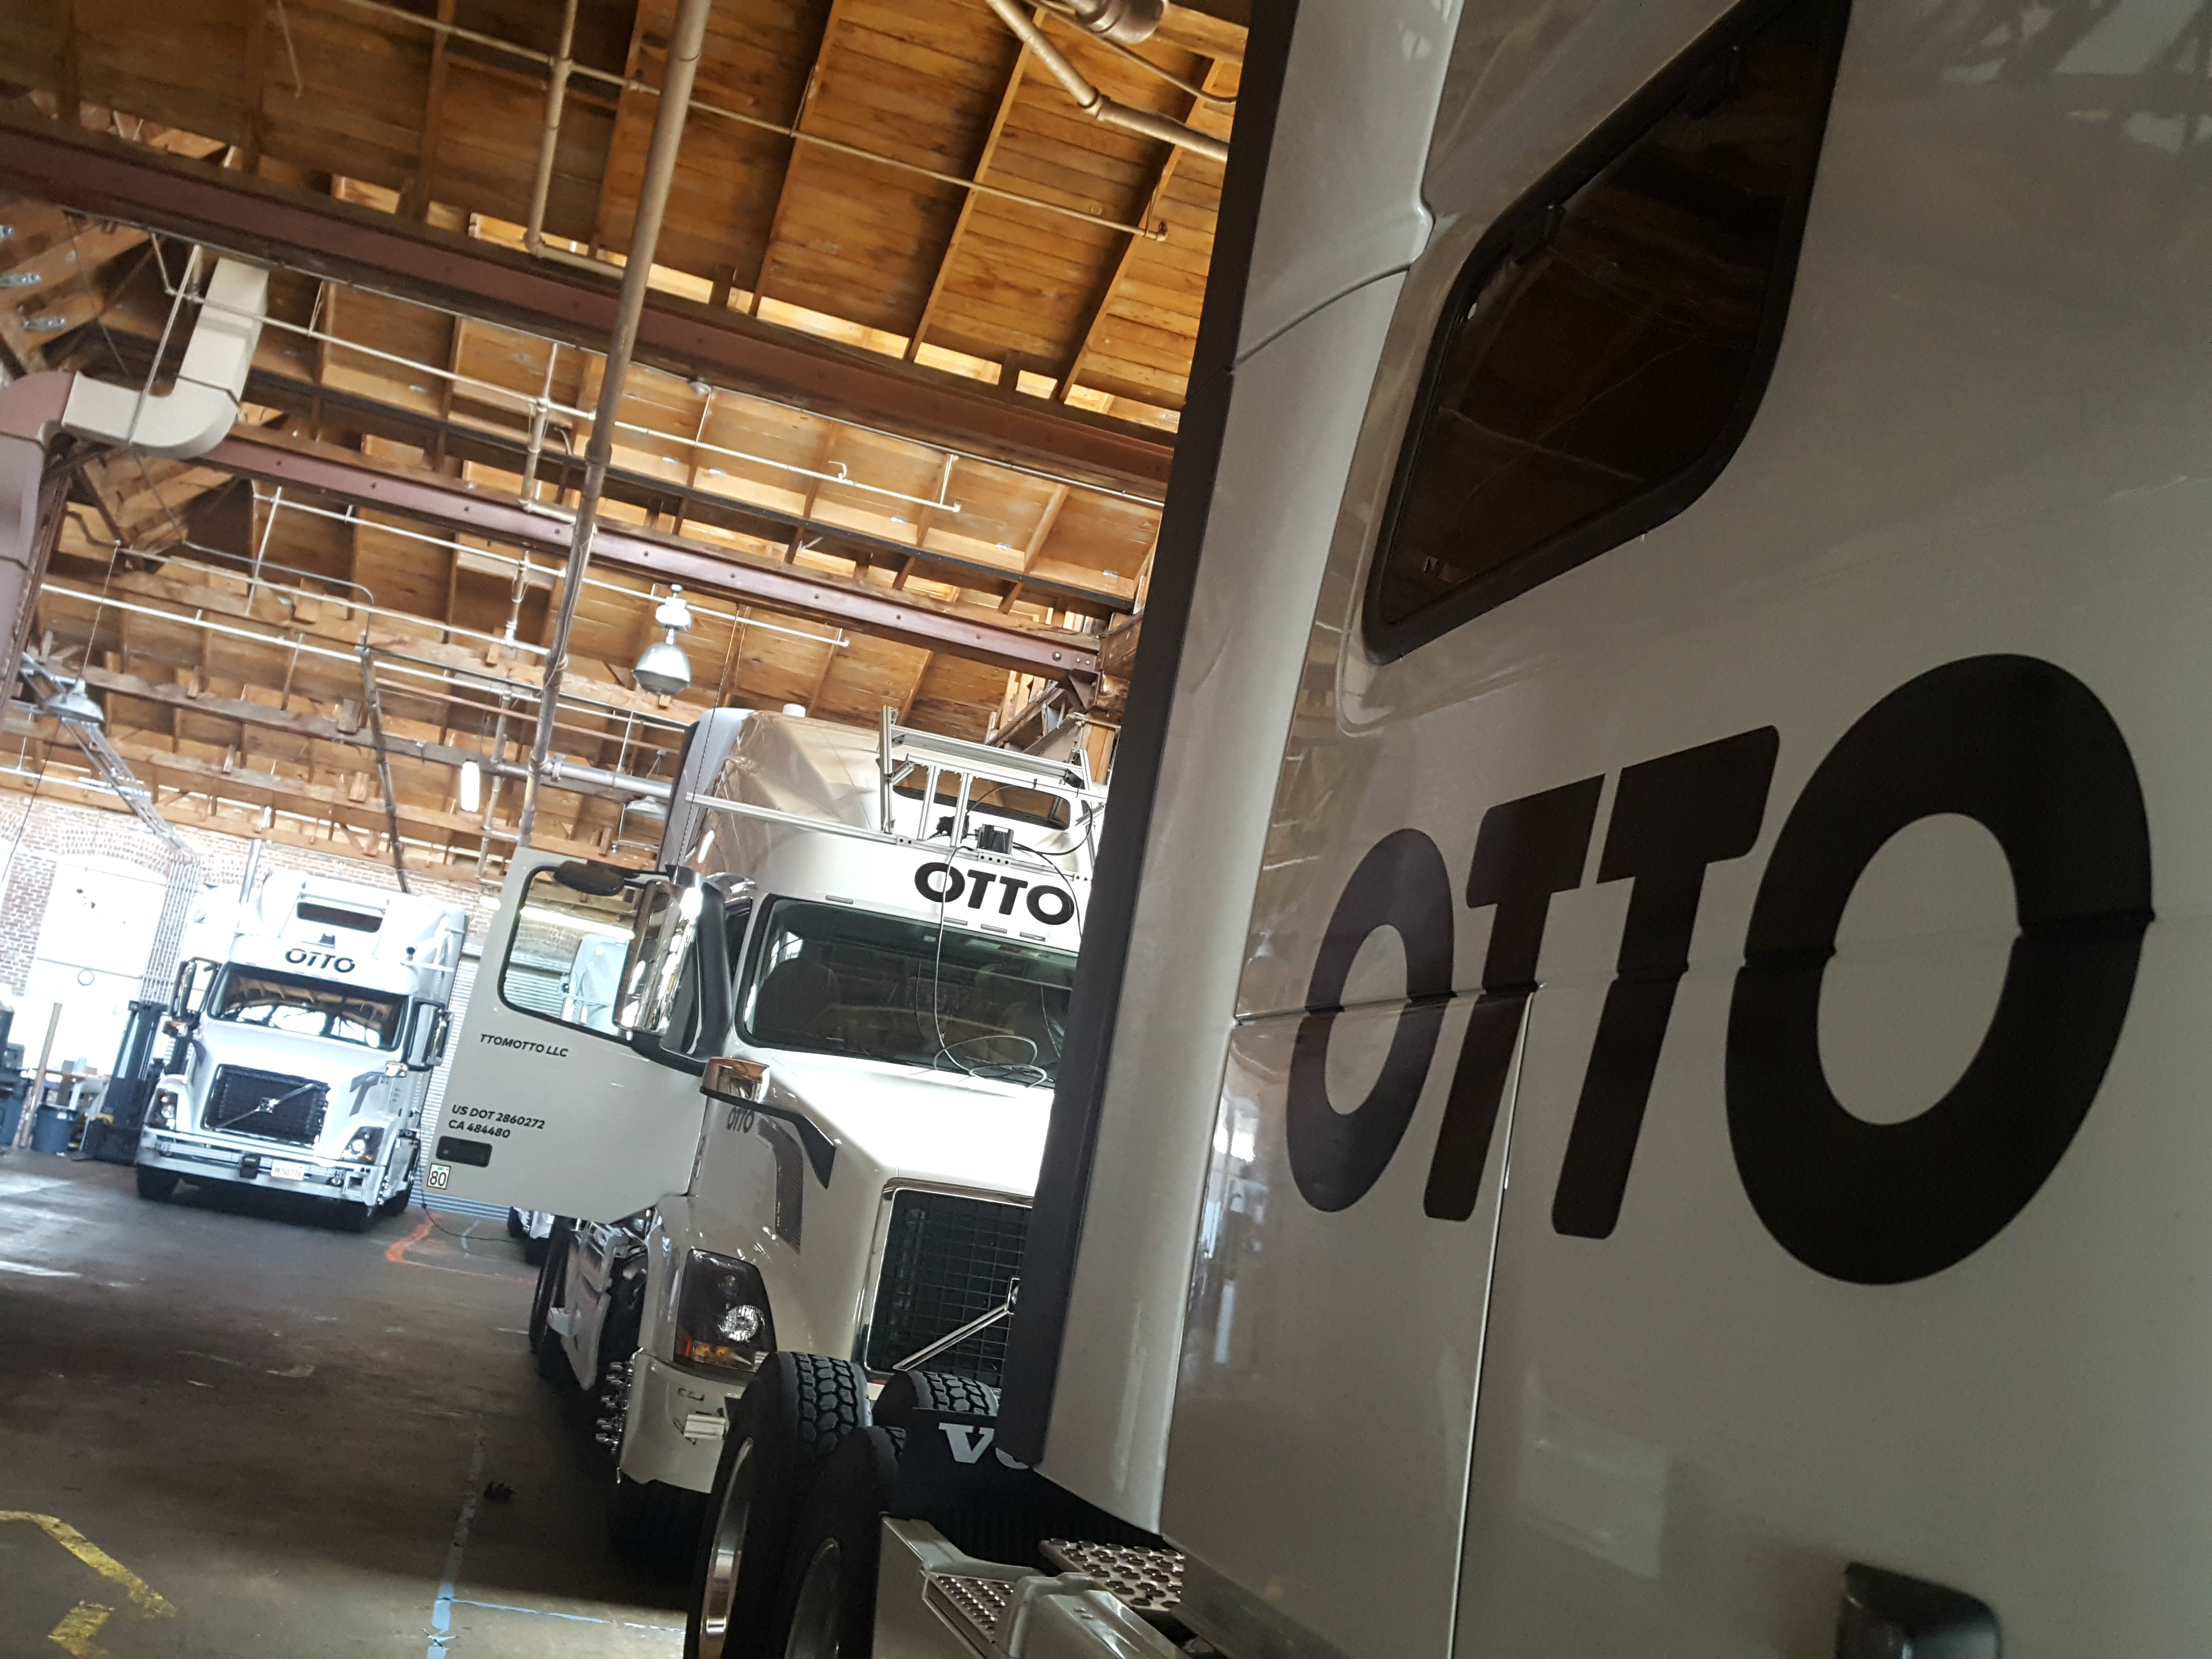 Five Volvo trucks outfitted with hardware for autonomous "cruising" sit in Otto's headquarters in San Francisco on Aug. 18, 2016. (Katy Steinmetz for TIME)